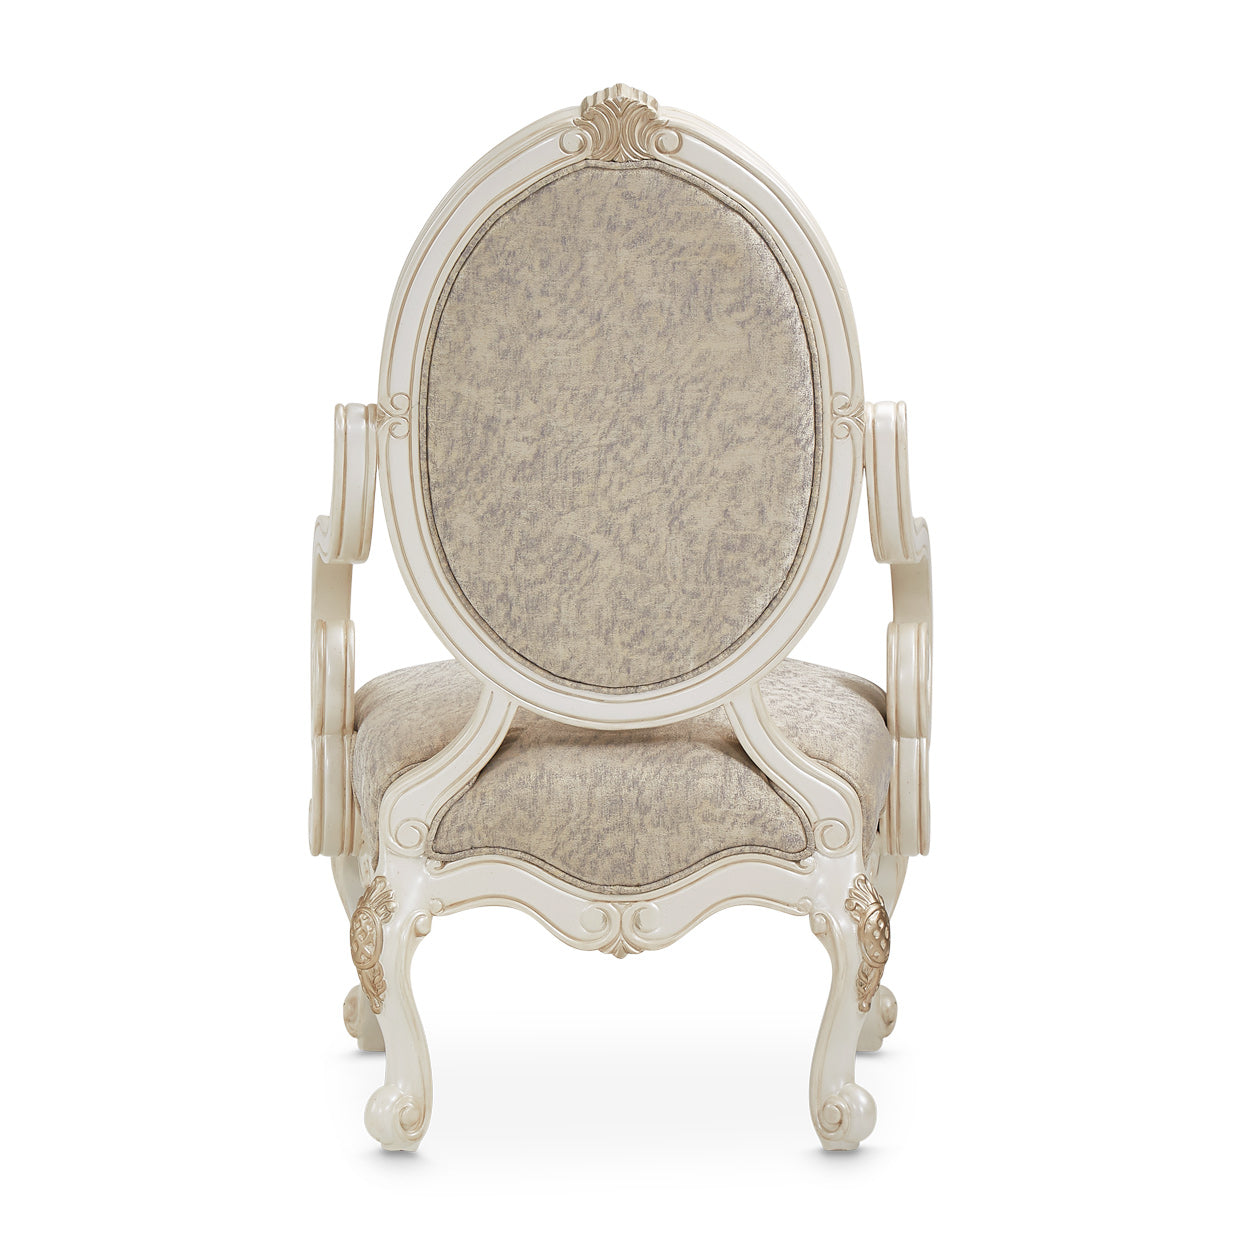 LAVELLE-CLASSIC PEARL Lavelle Oval Back Wood Chair Mystic Classic Pearl - Dream art Gallery